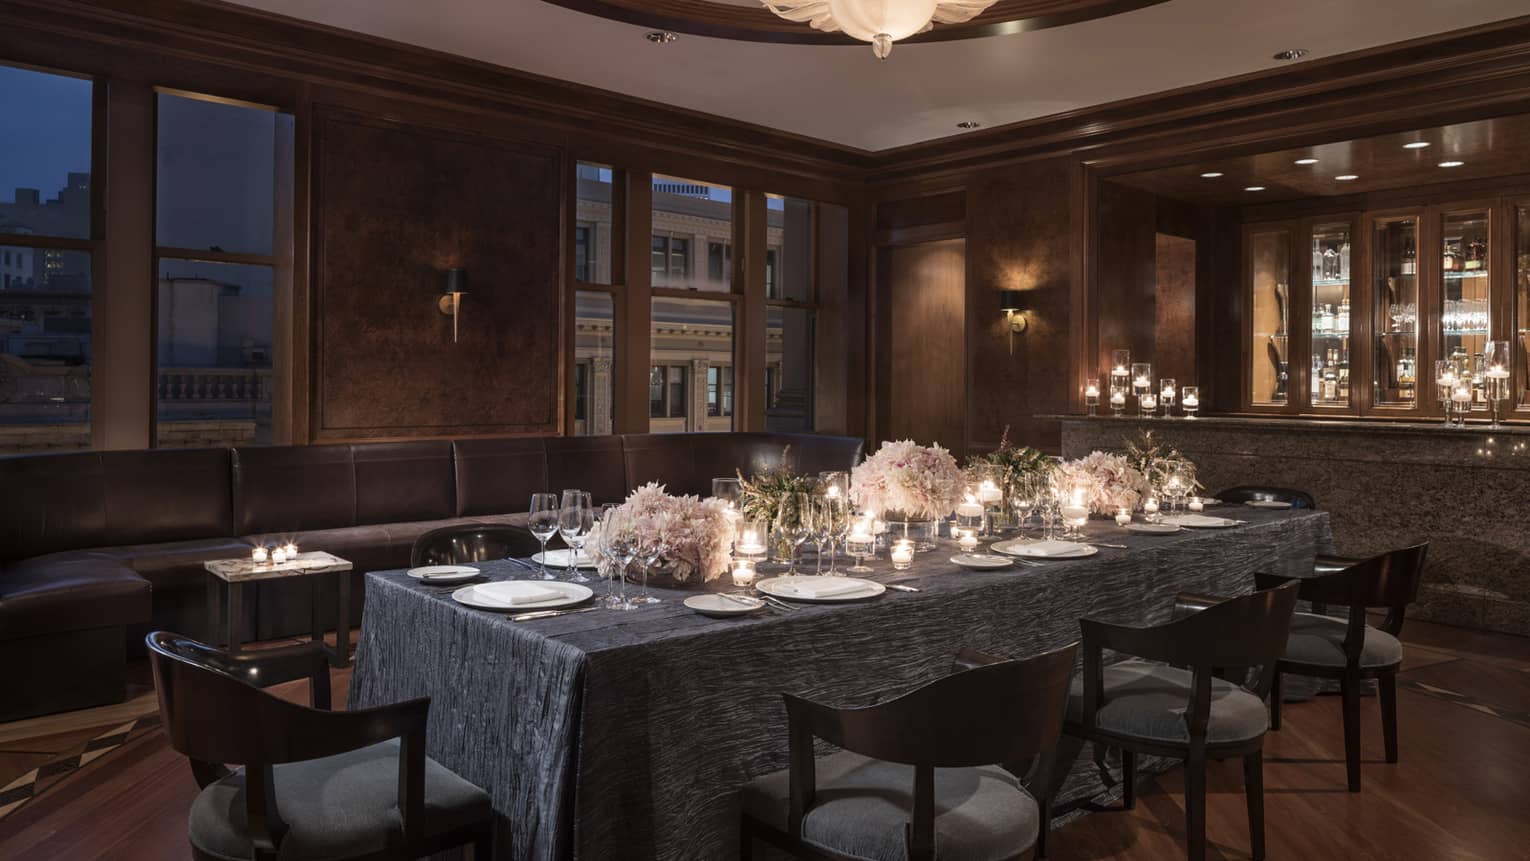 Private dining table with candles, flowers near long leather banquette, windows at night